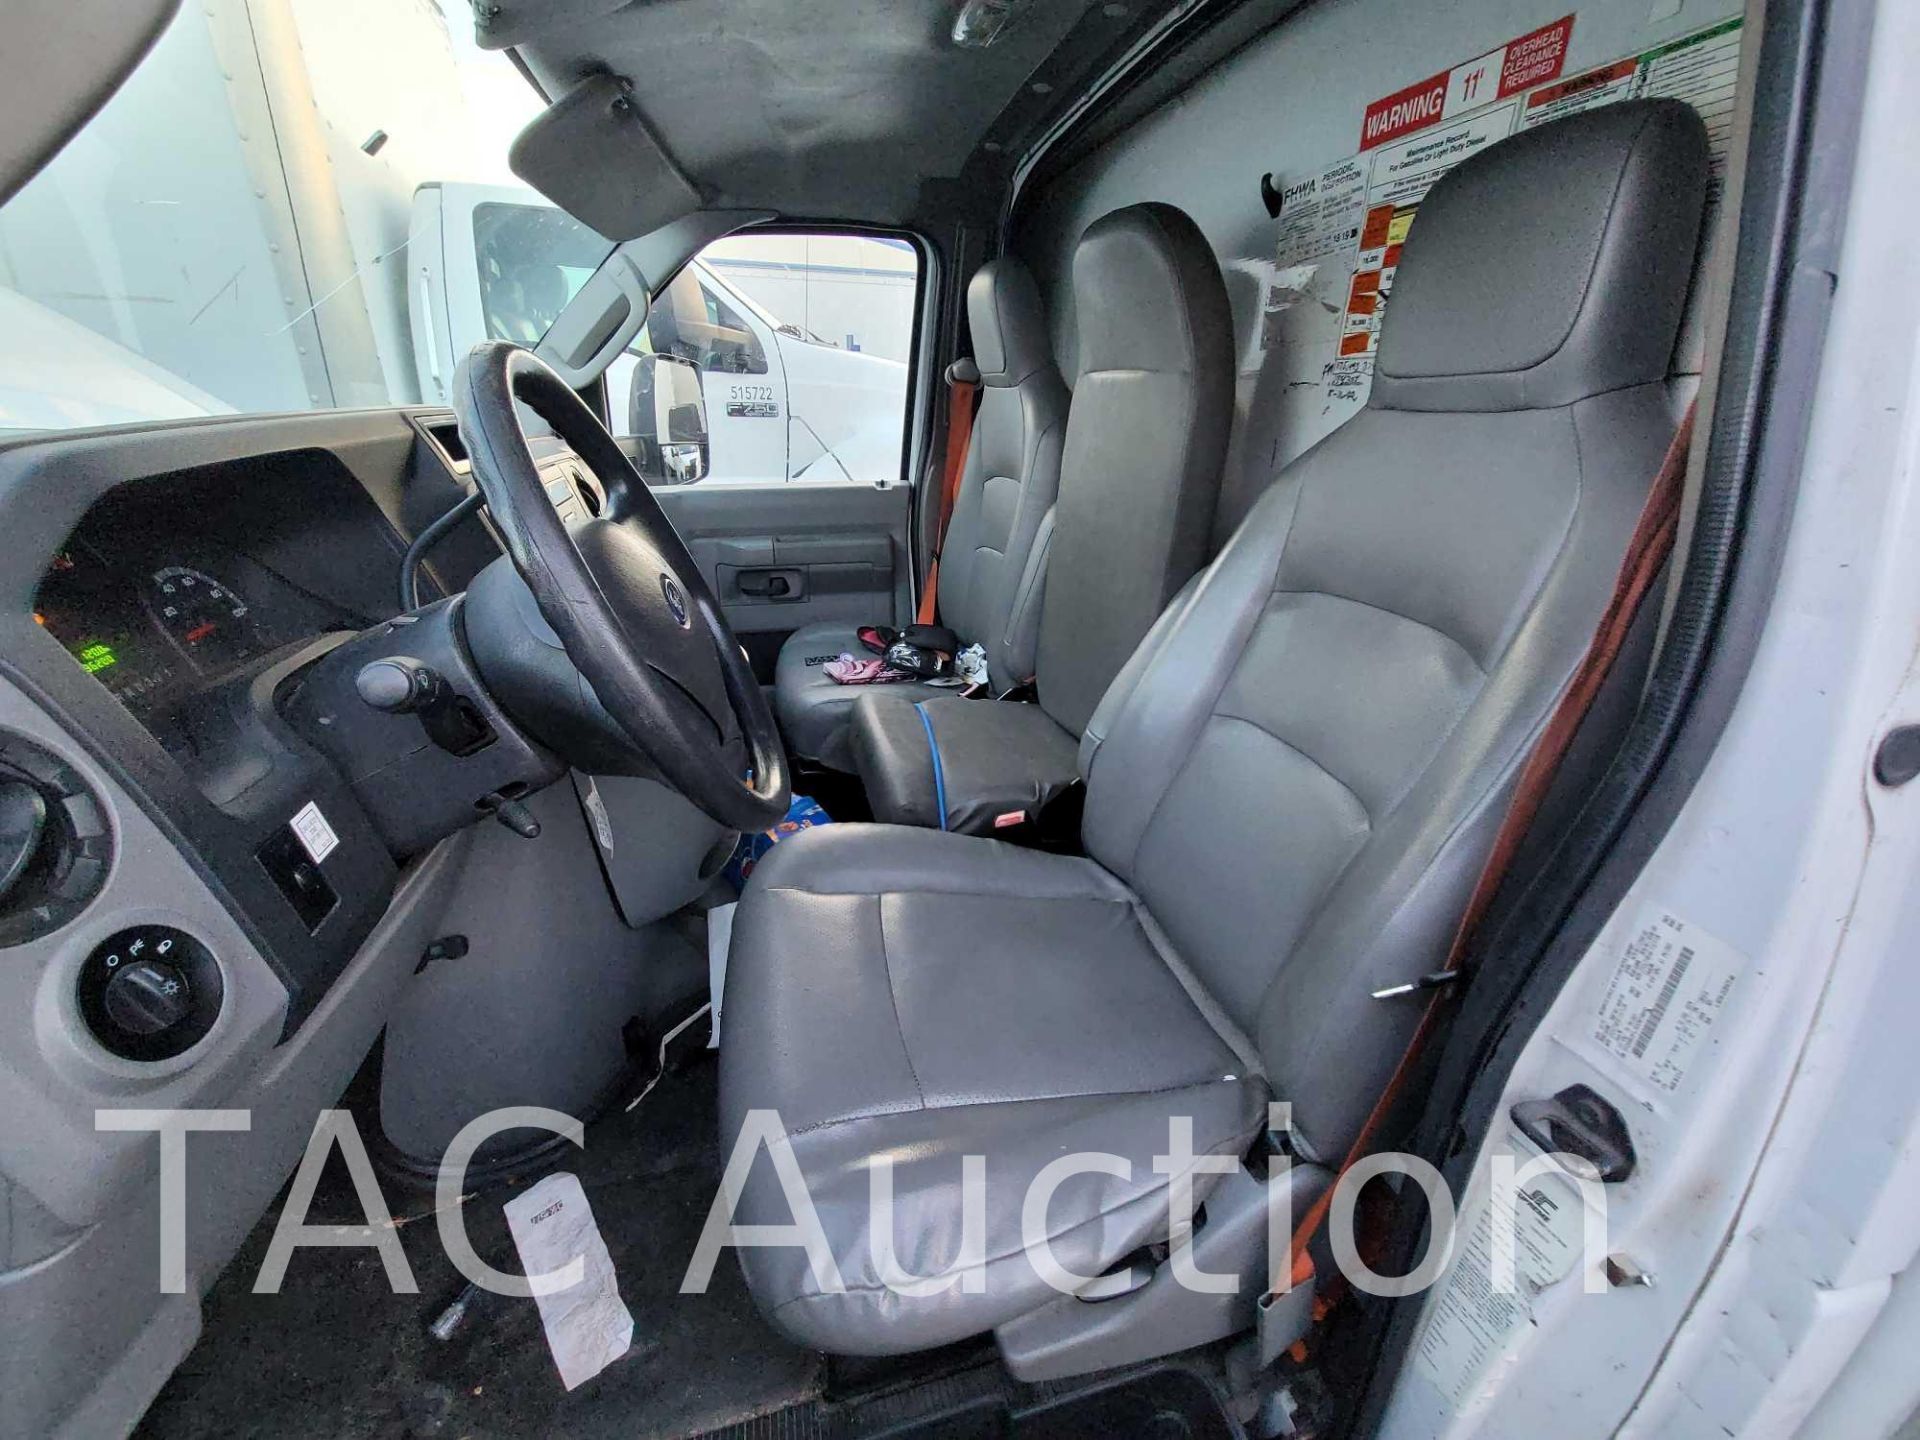 2013 Ford E-350 16ft Box Truck - Image 9 of 42